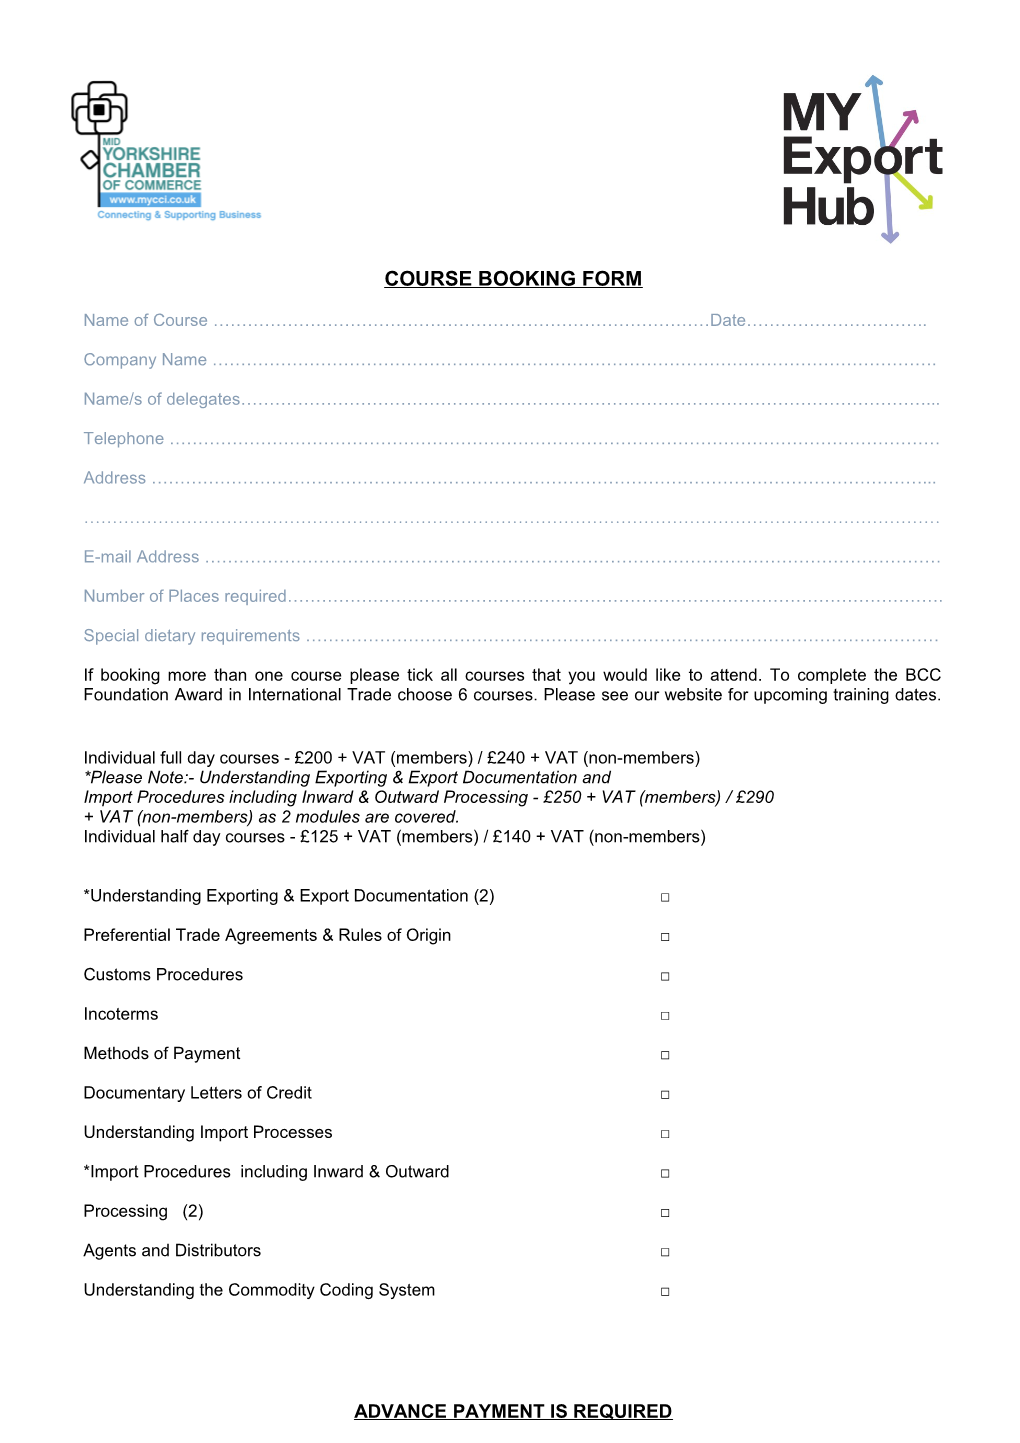 Course Booking Form